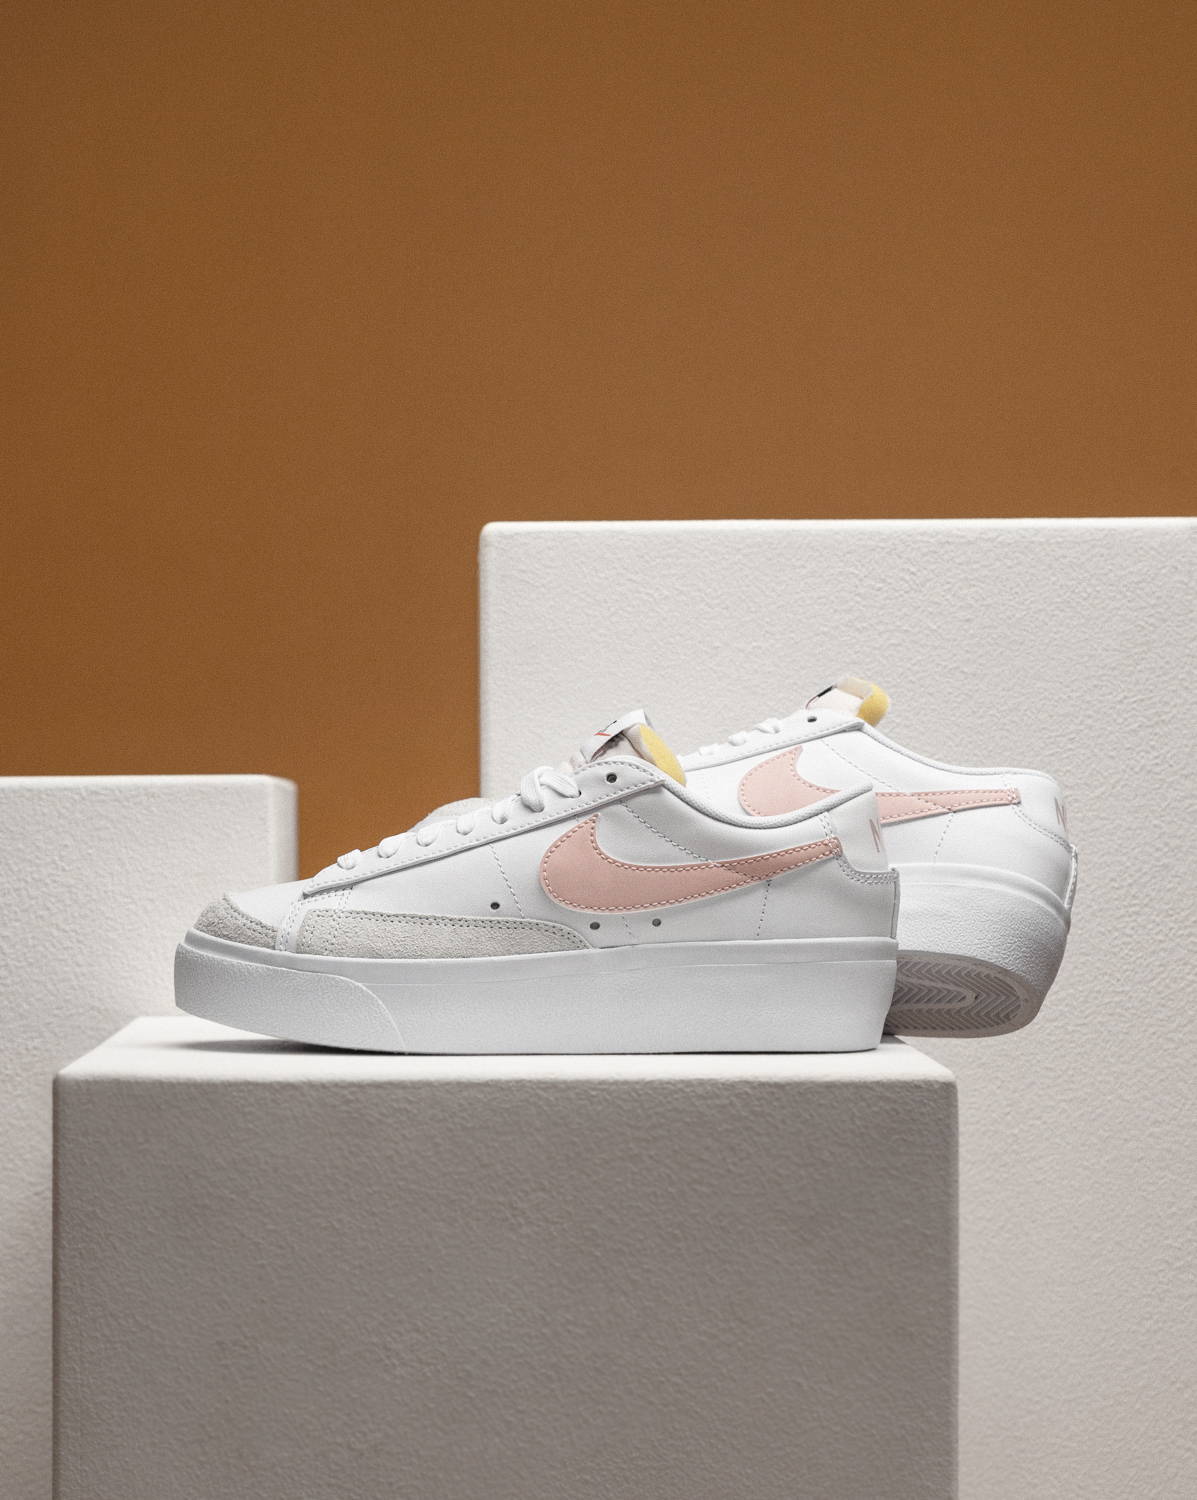 Nike Blazer Low - buy now at Asphaltgold Online Store!